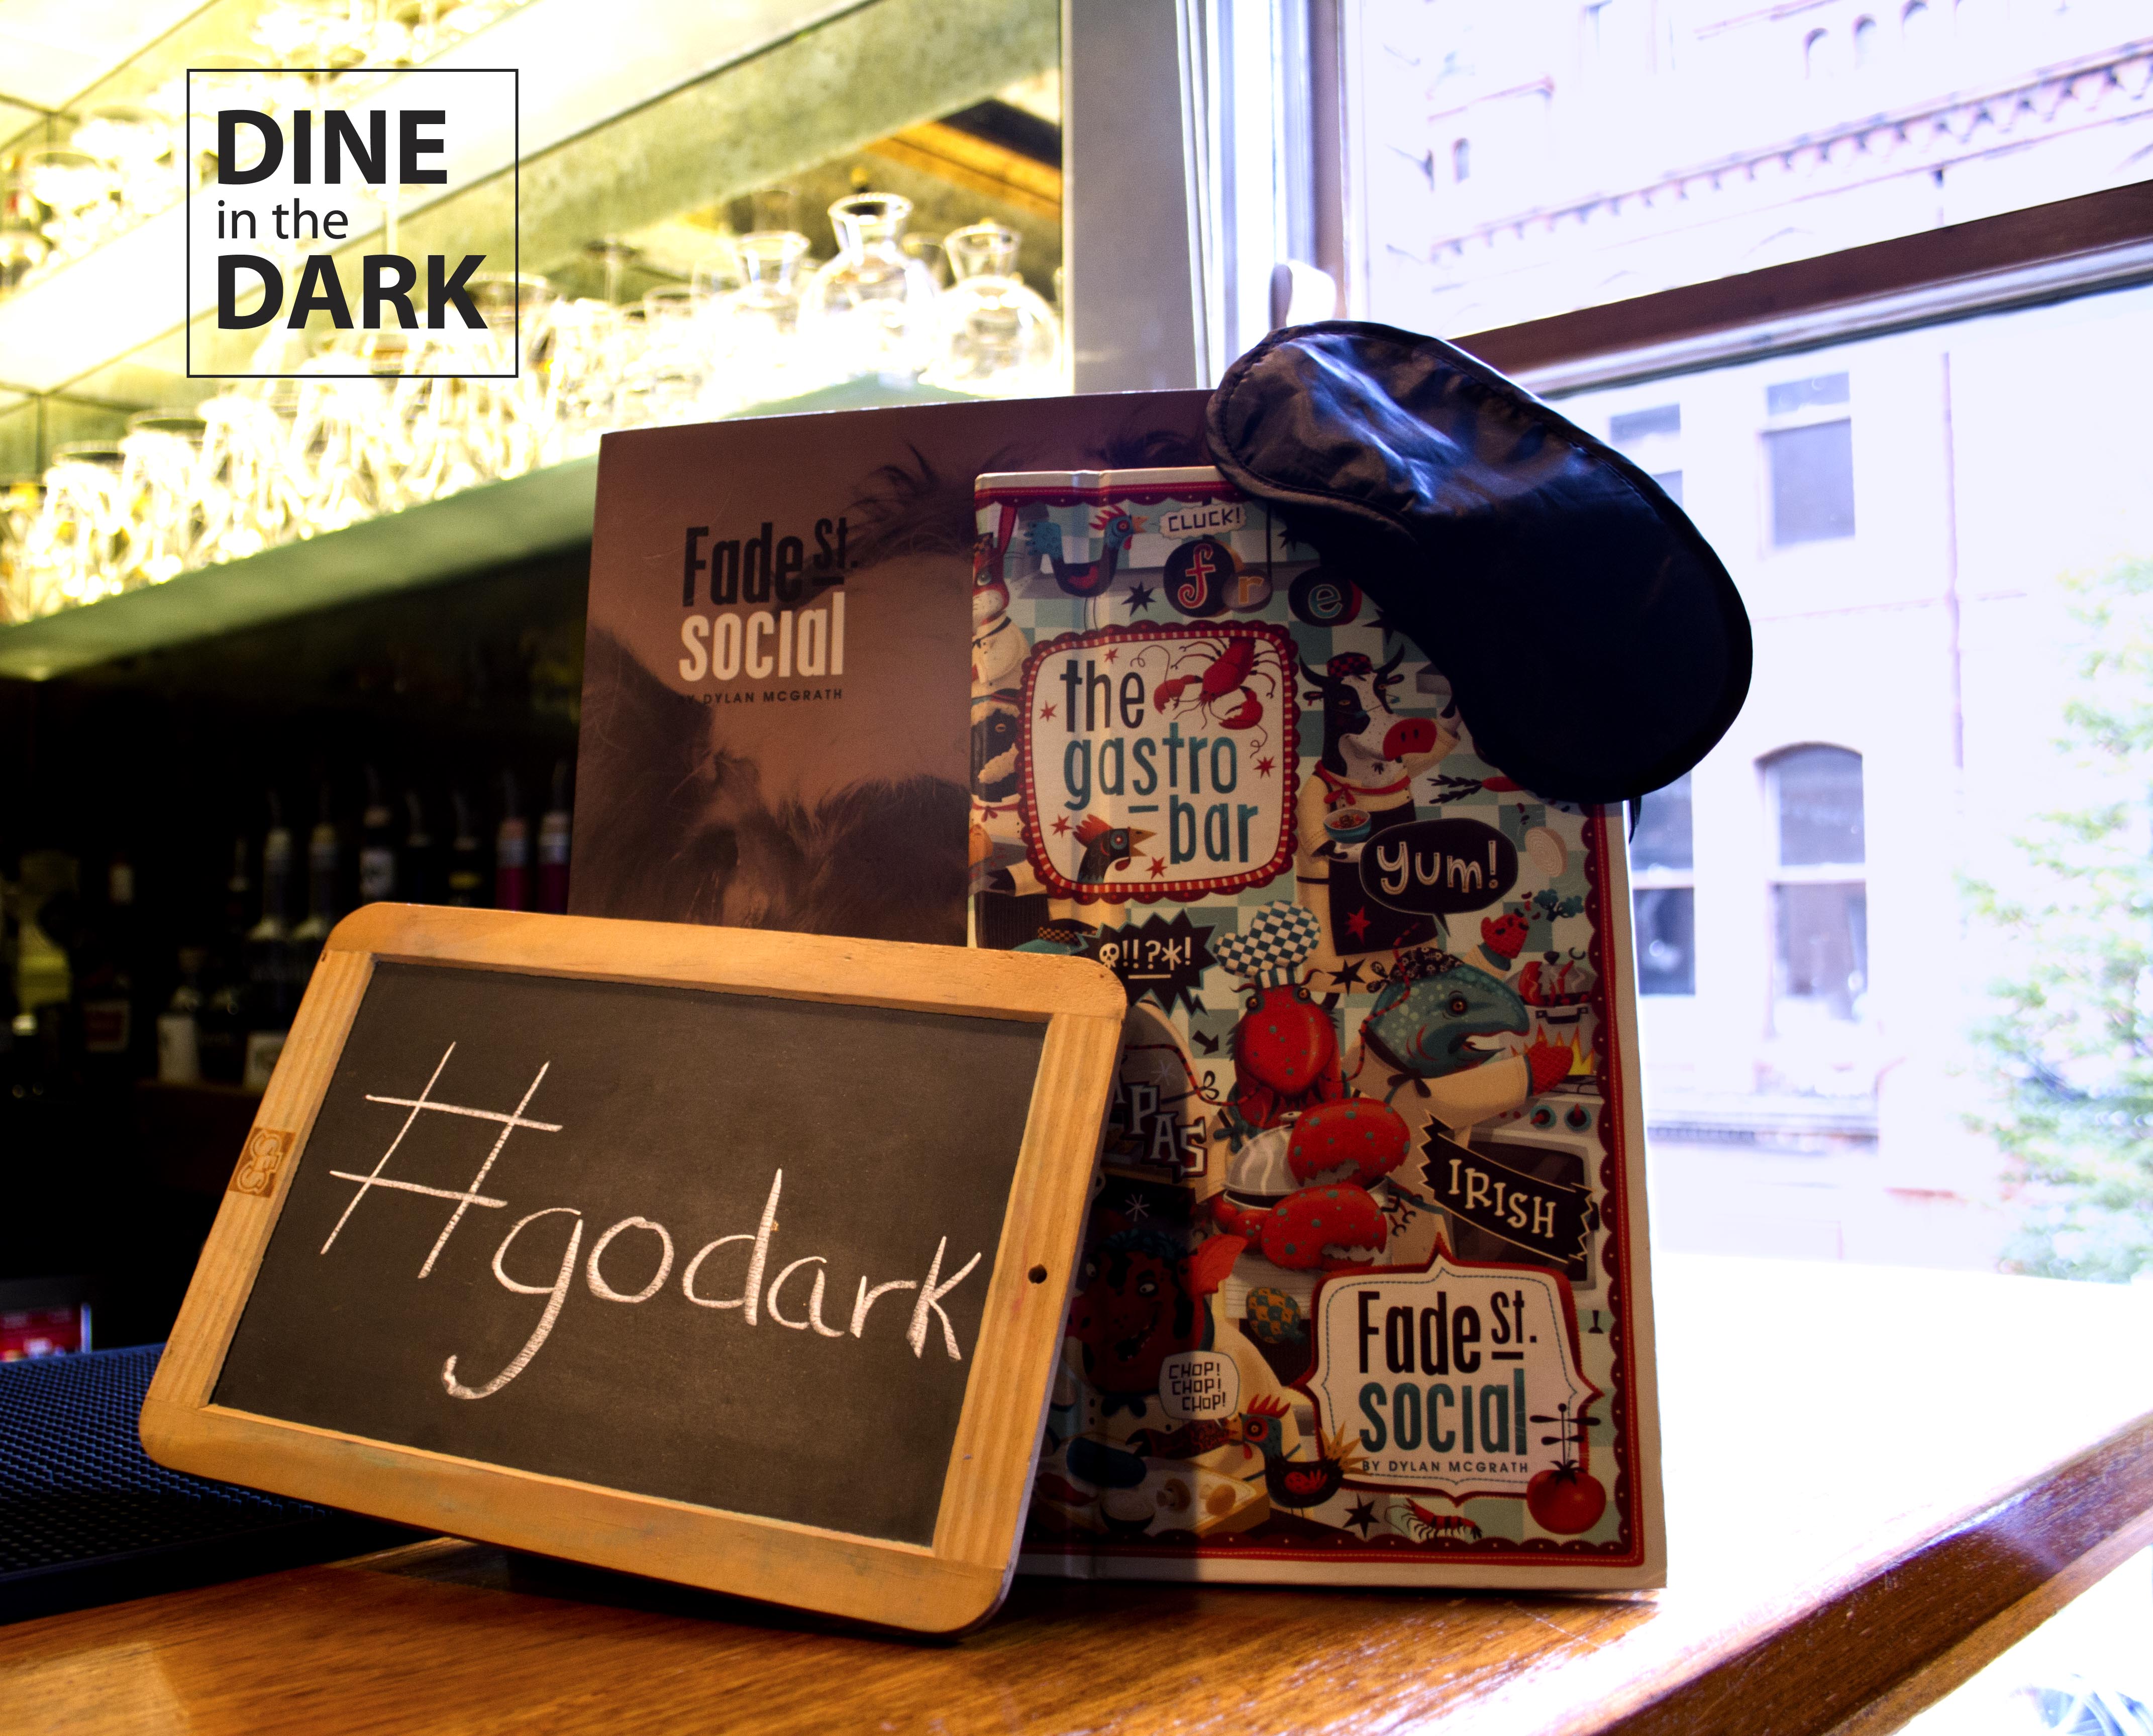 Fade Street Social goes over to the dark side for blind charity’s unique Dine in the Dark event